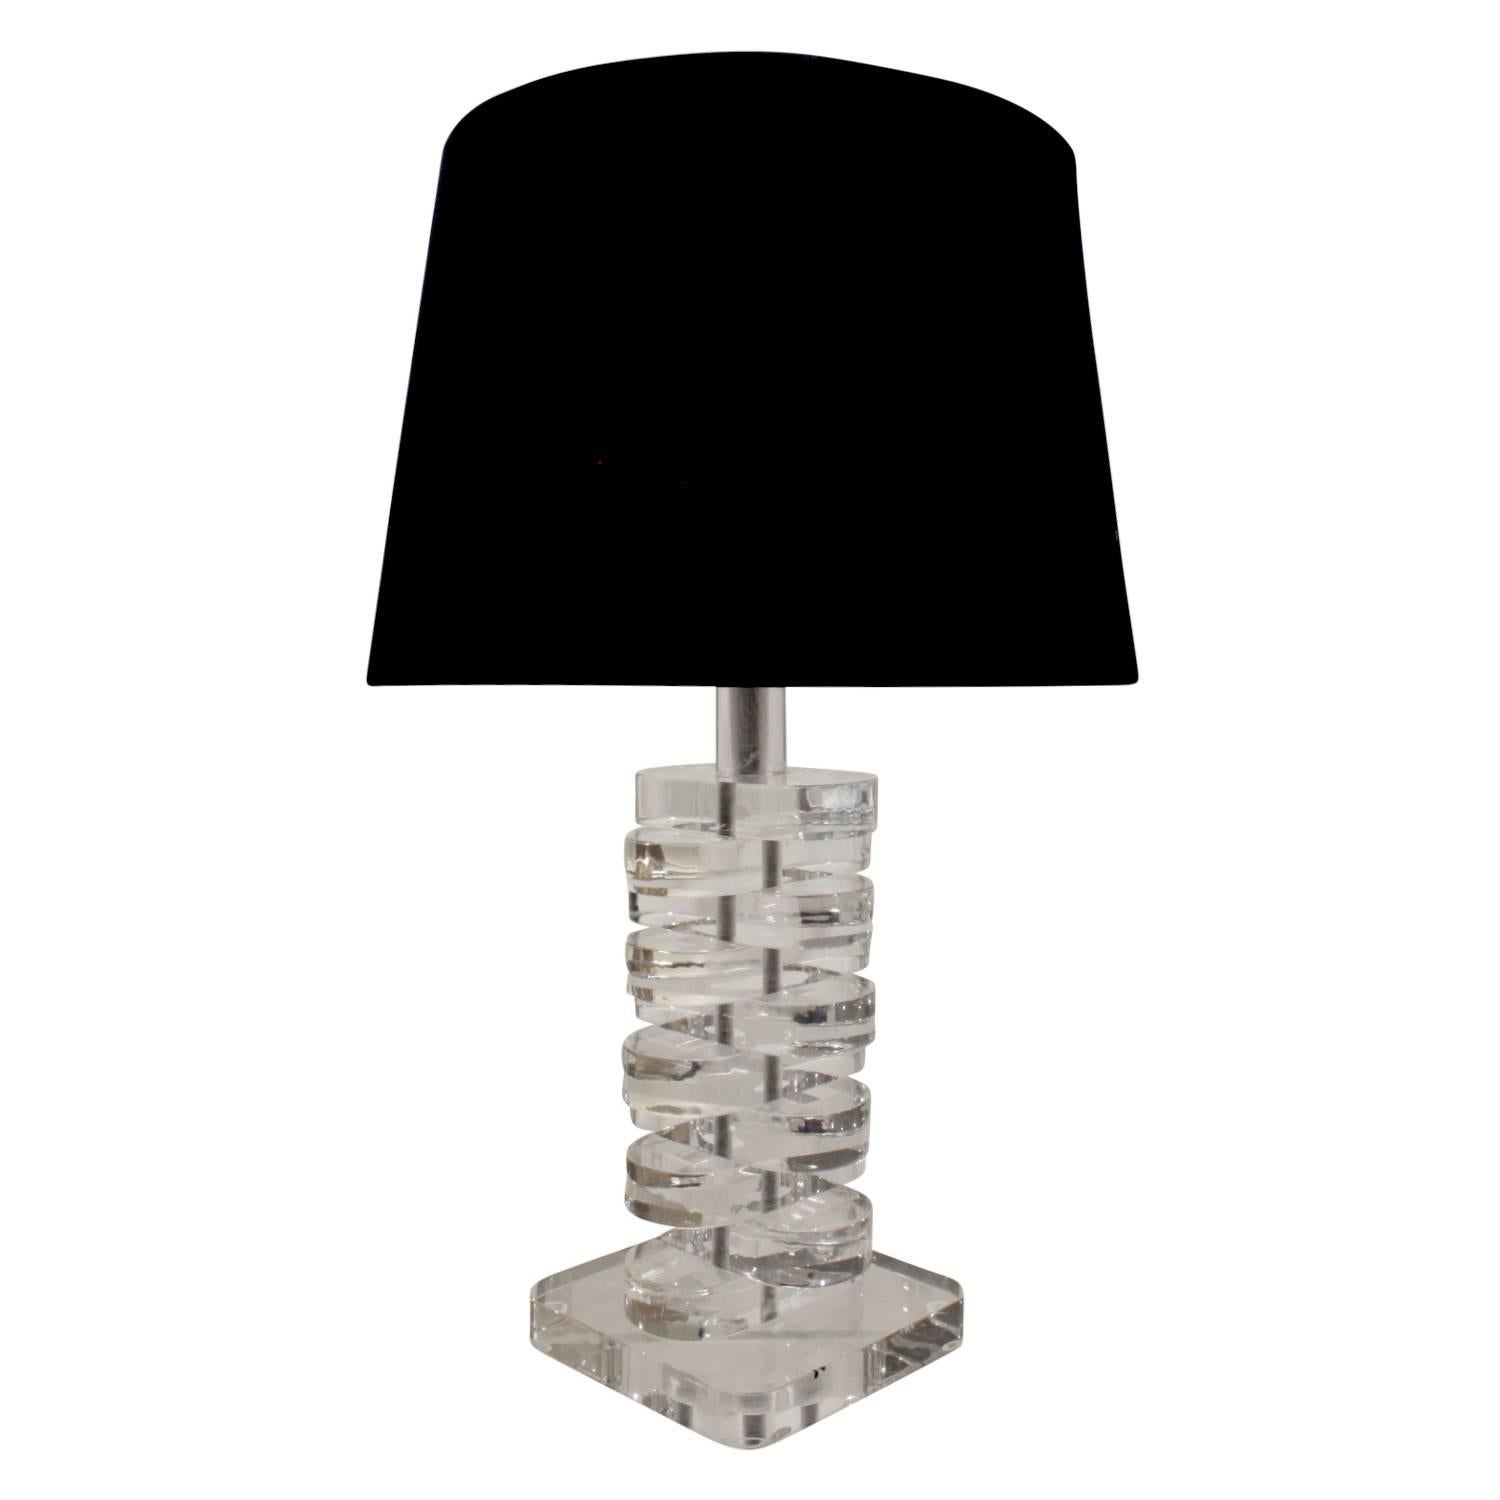 Sculptural table lamp with stacked Lucite disk design, American, 1970s. This would be ideal as a desk lamp.

Shade diameter: 13 inches.